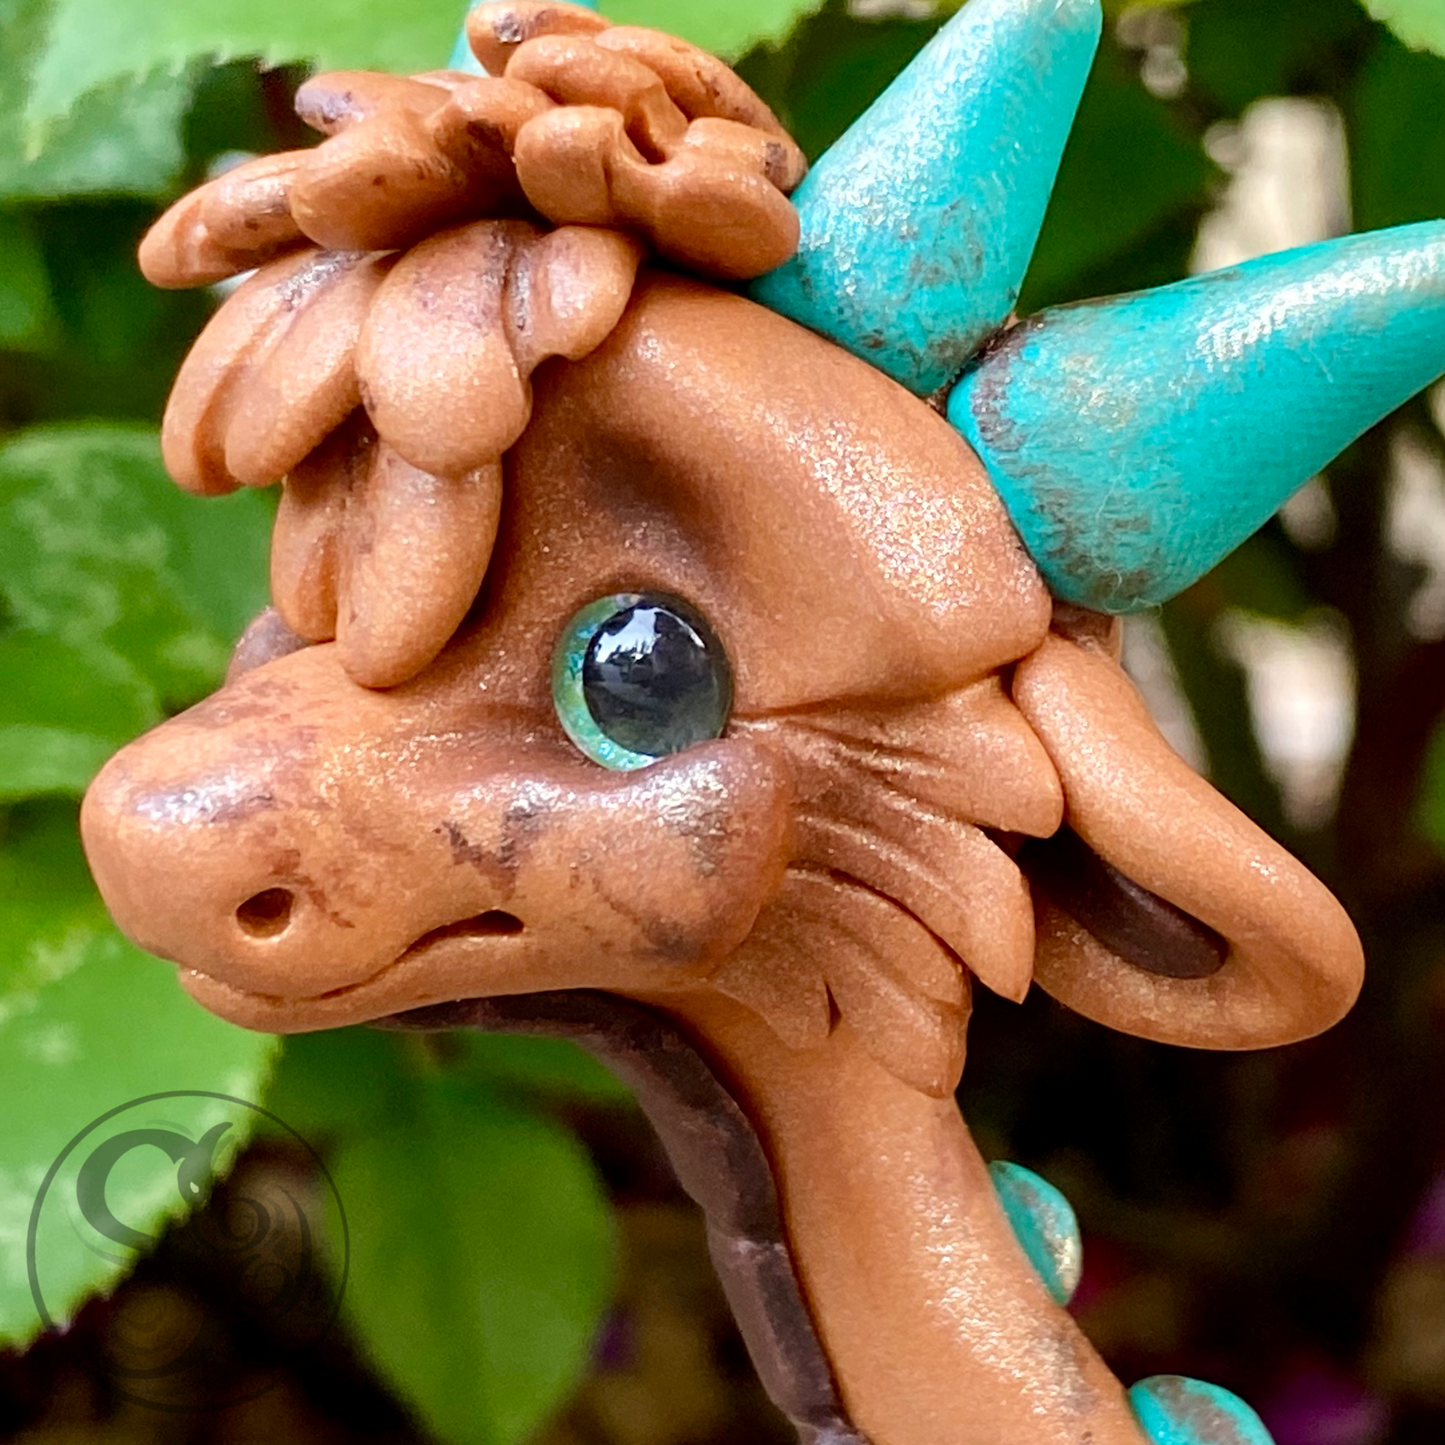 Copper and Teal Dragon